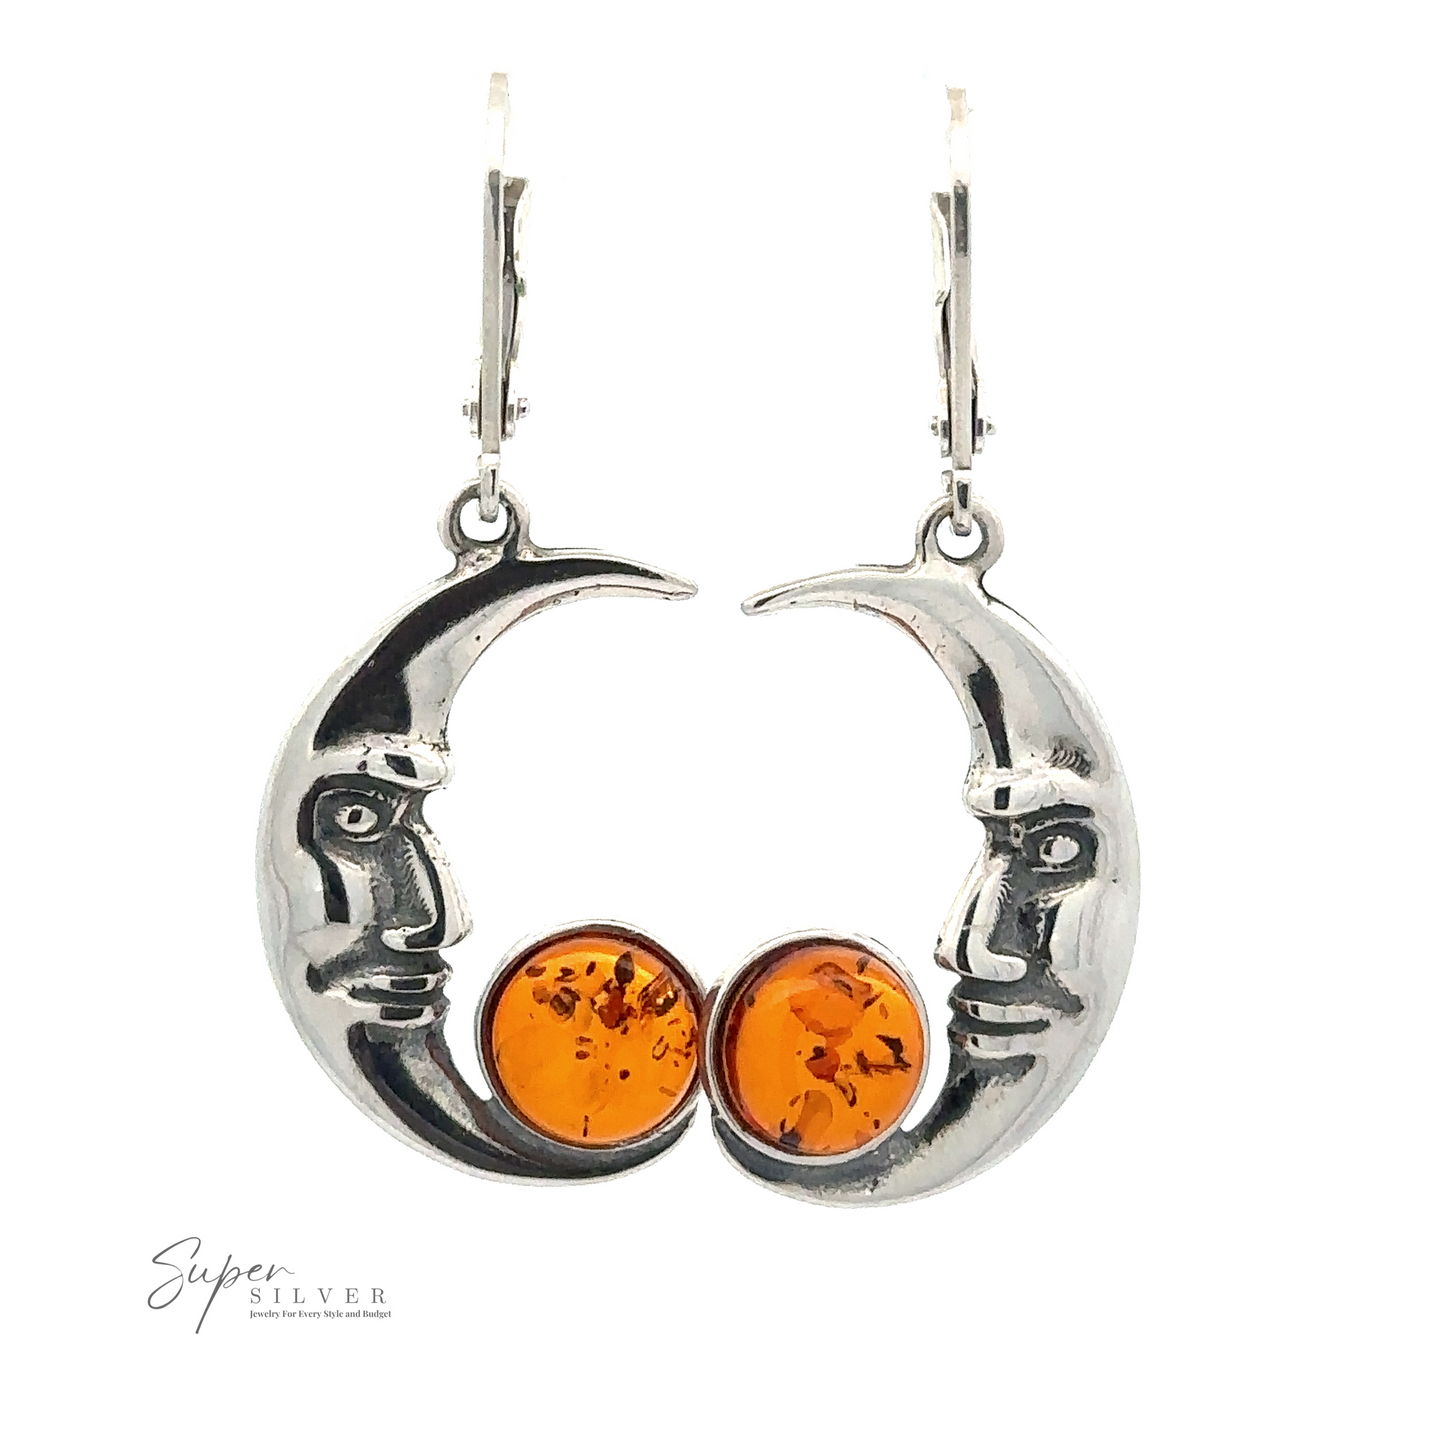 Amber Man-in-the-Moon Earrings with faces, each holding a round Baltic amber gem in the middle. The text "Super Silver" is visible at the bottom left corner.